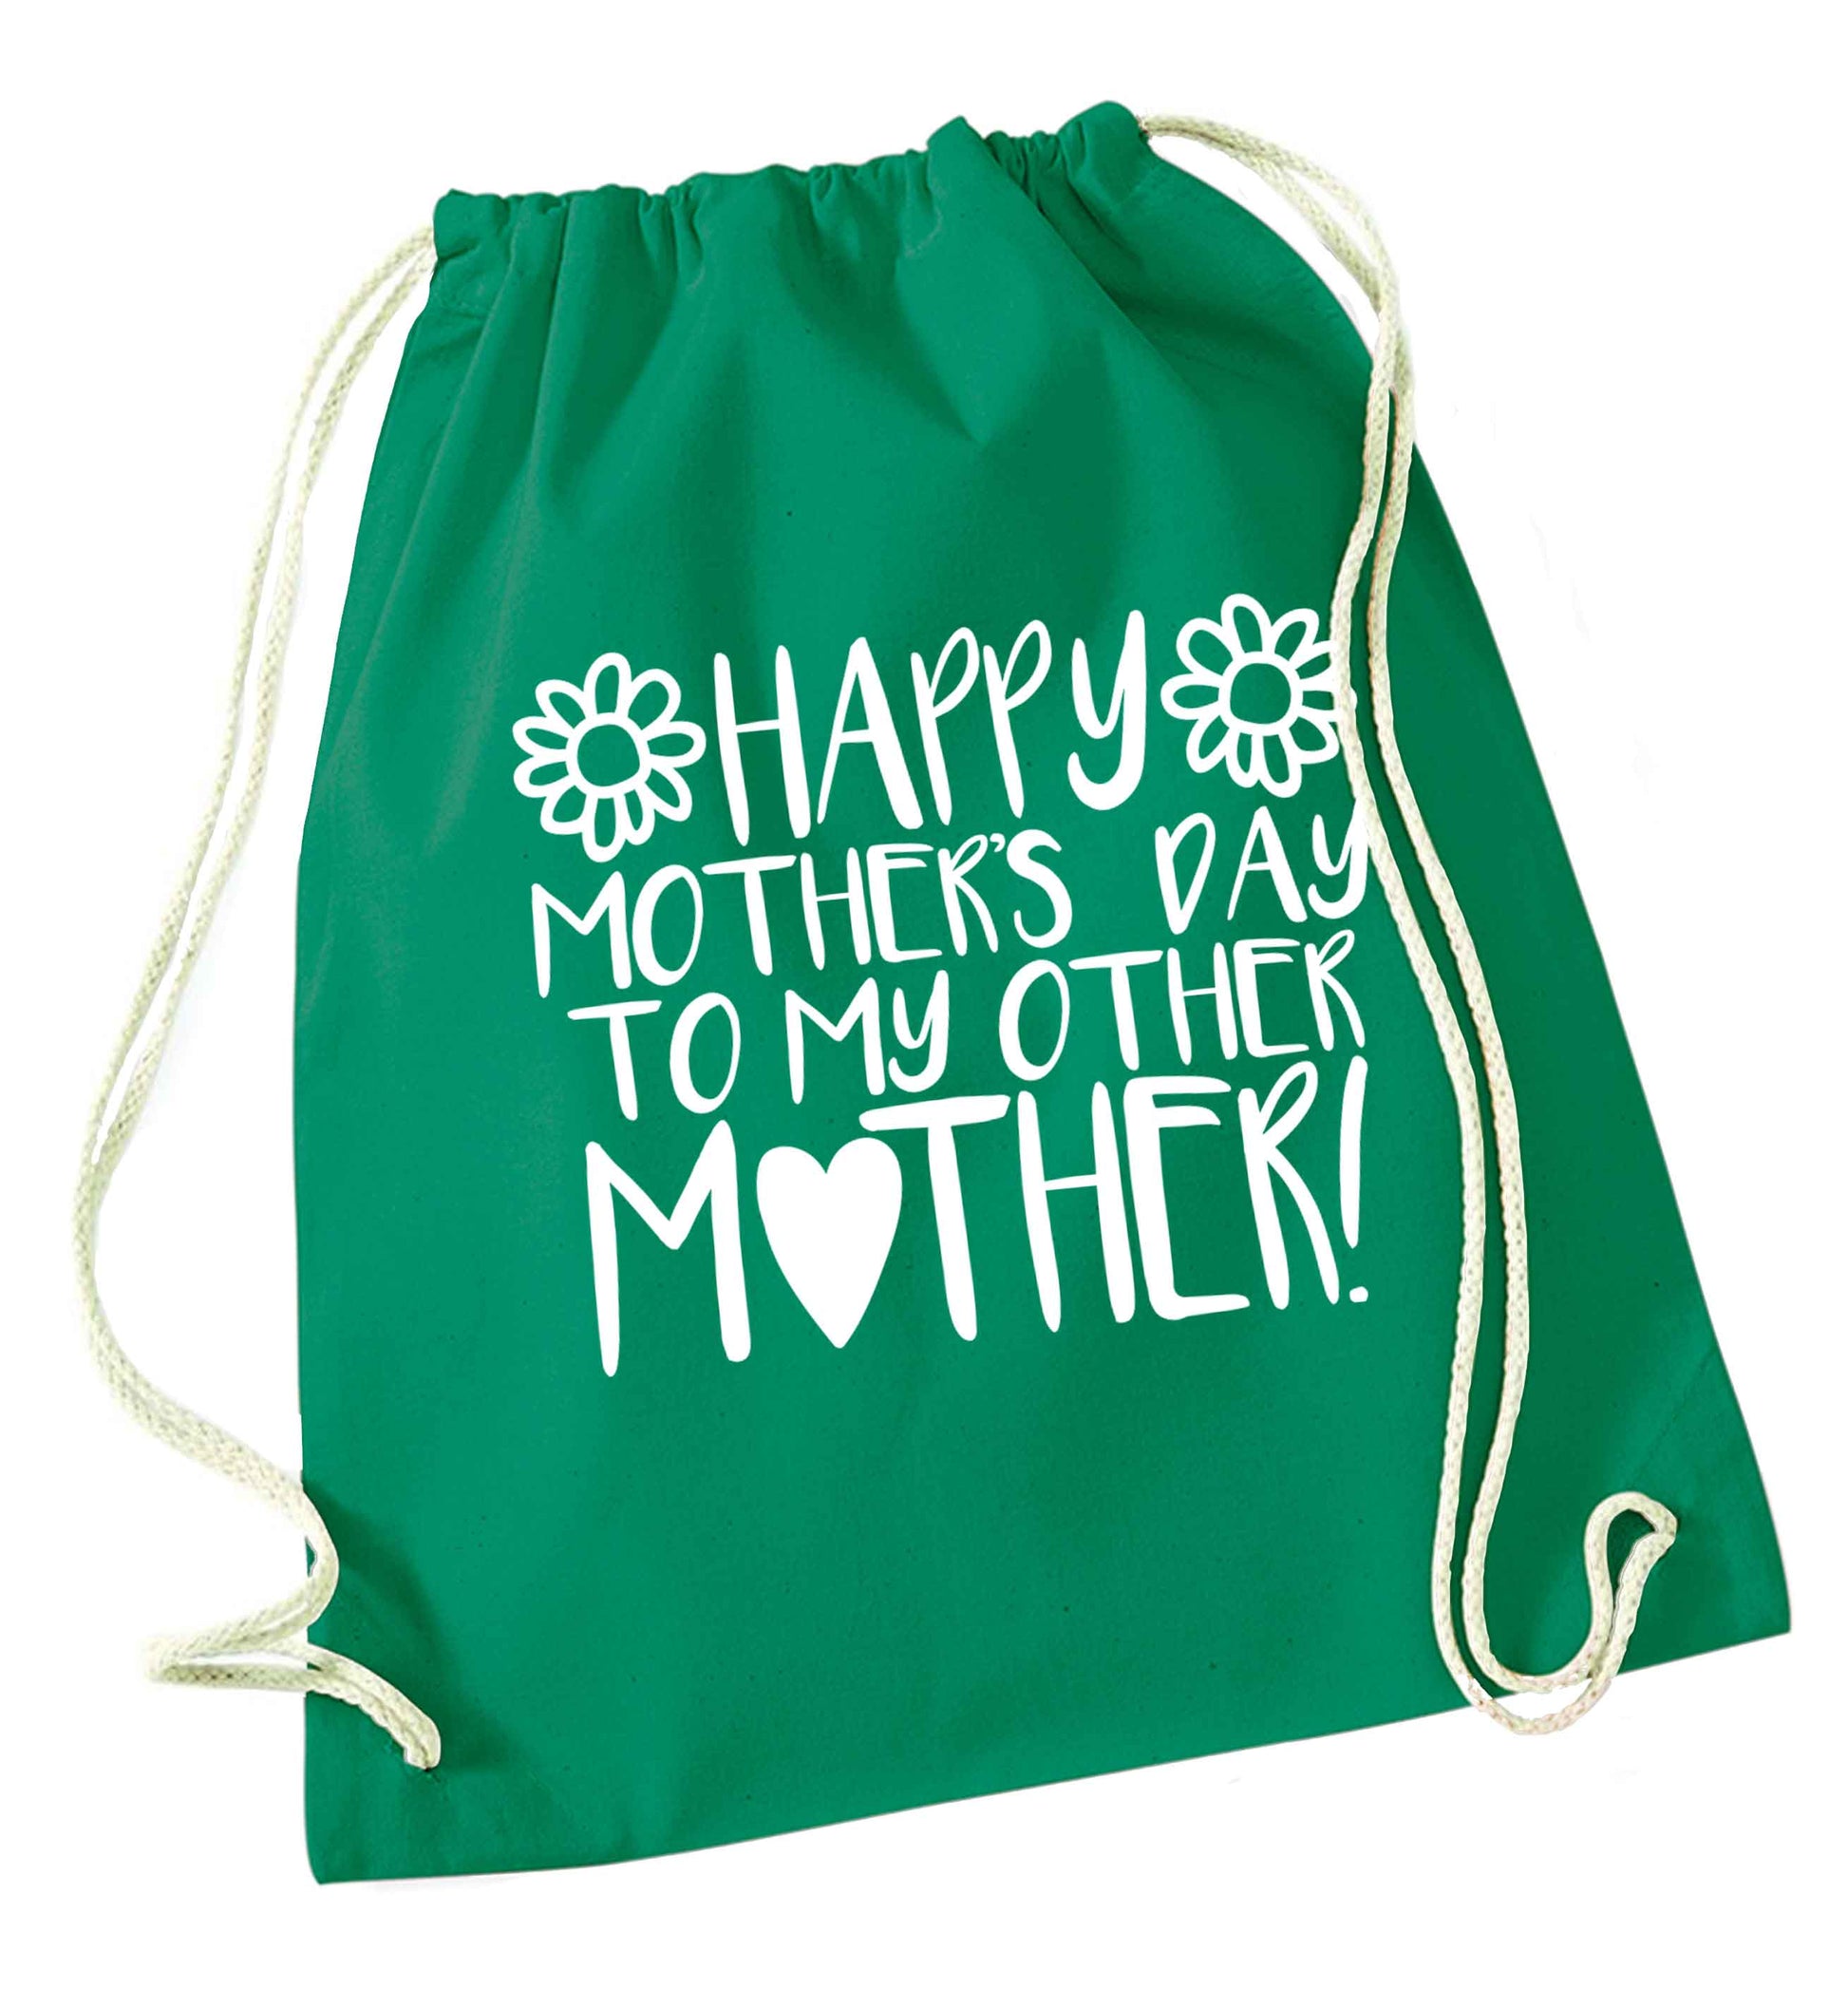 Happy mother's day to my other mother green drawstring bag